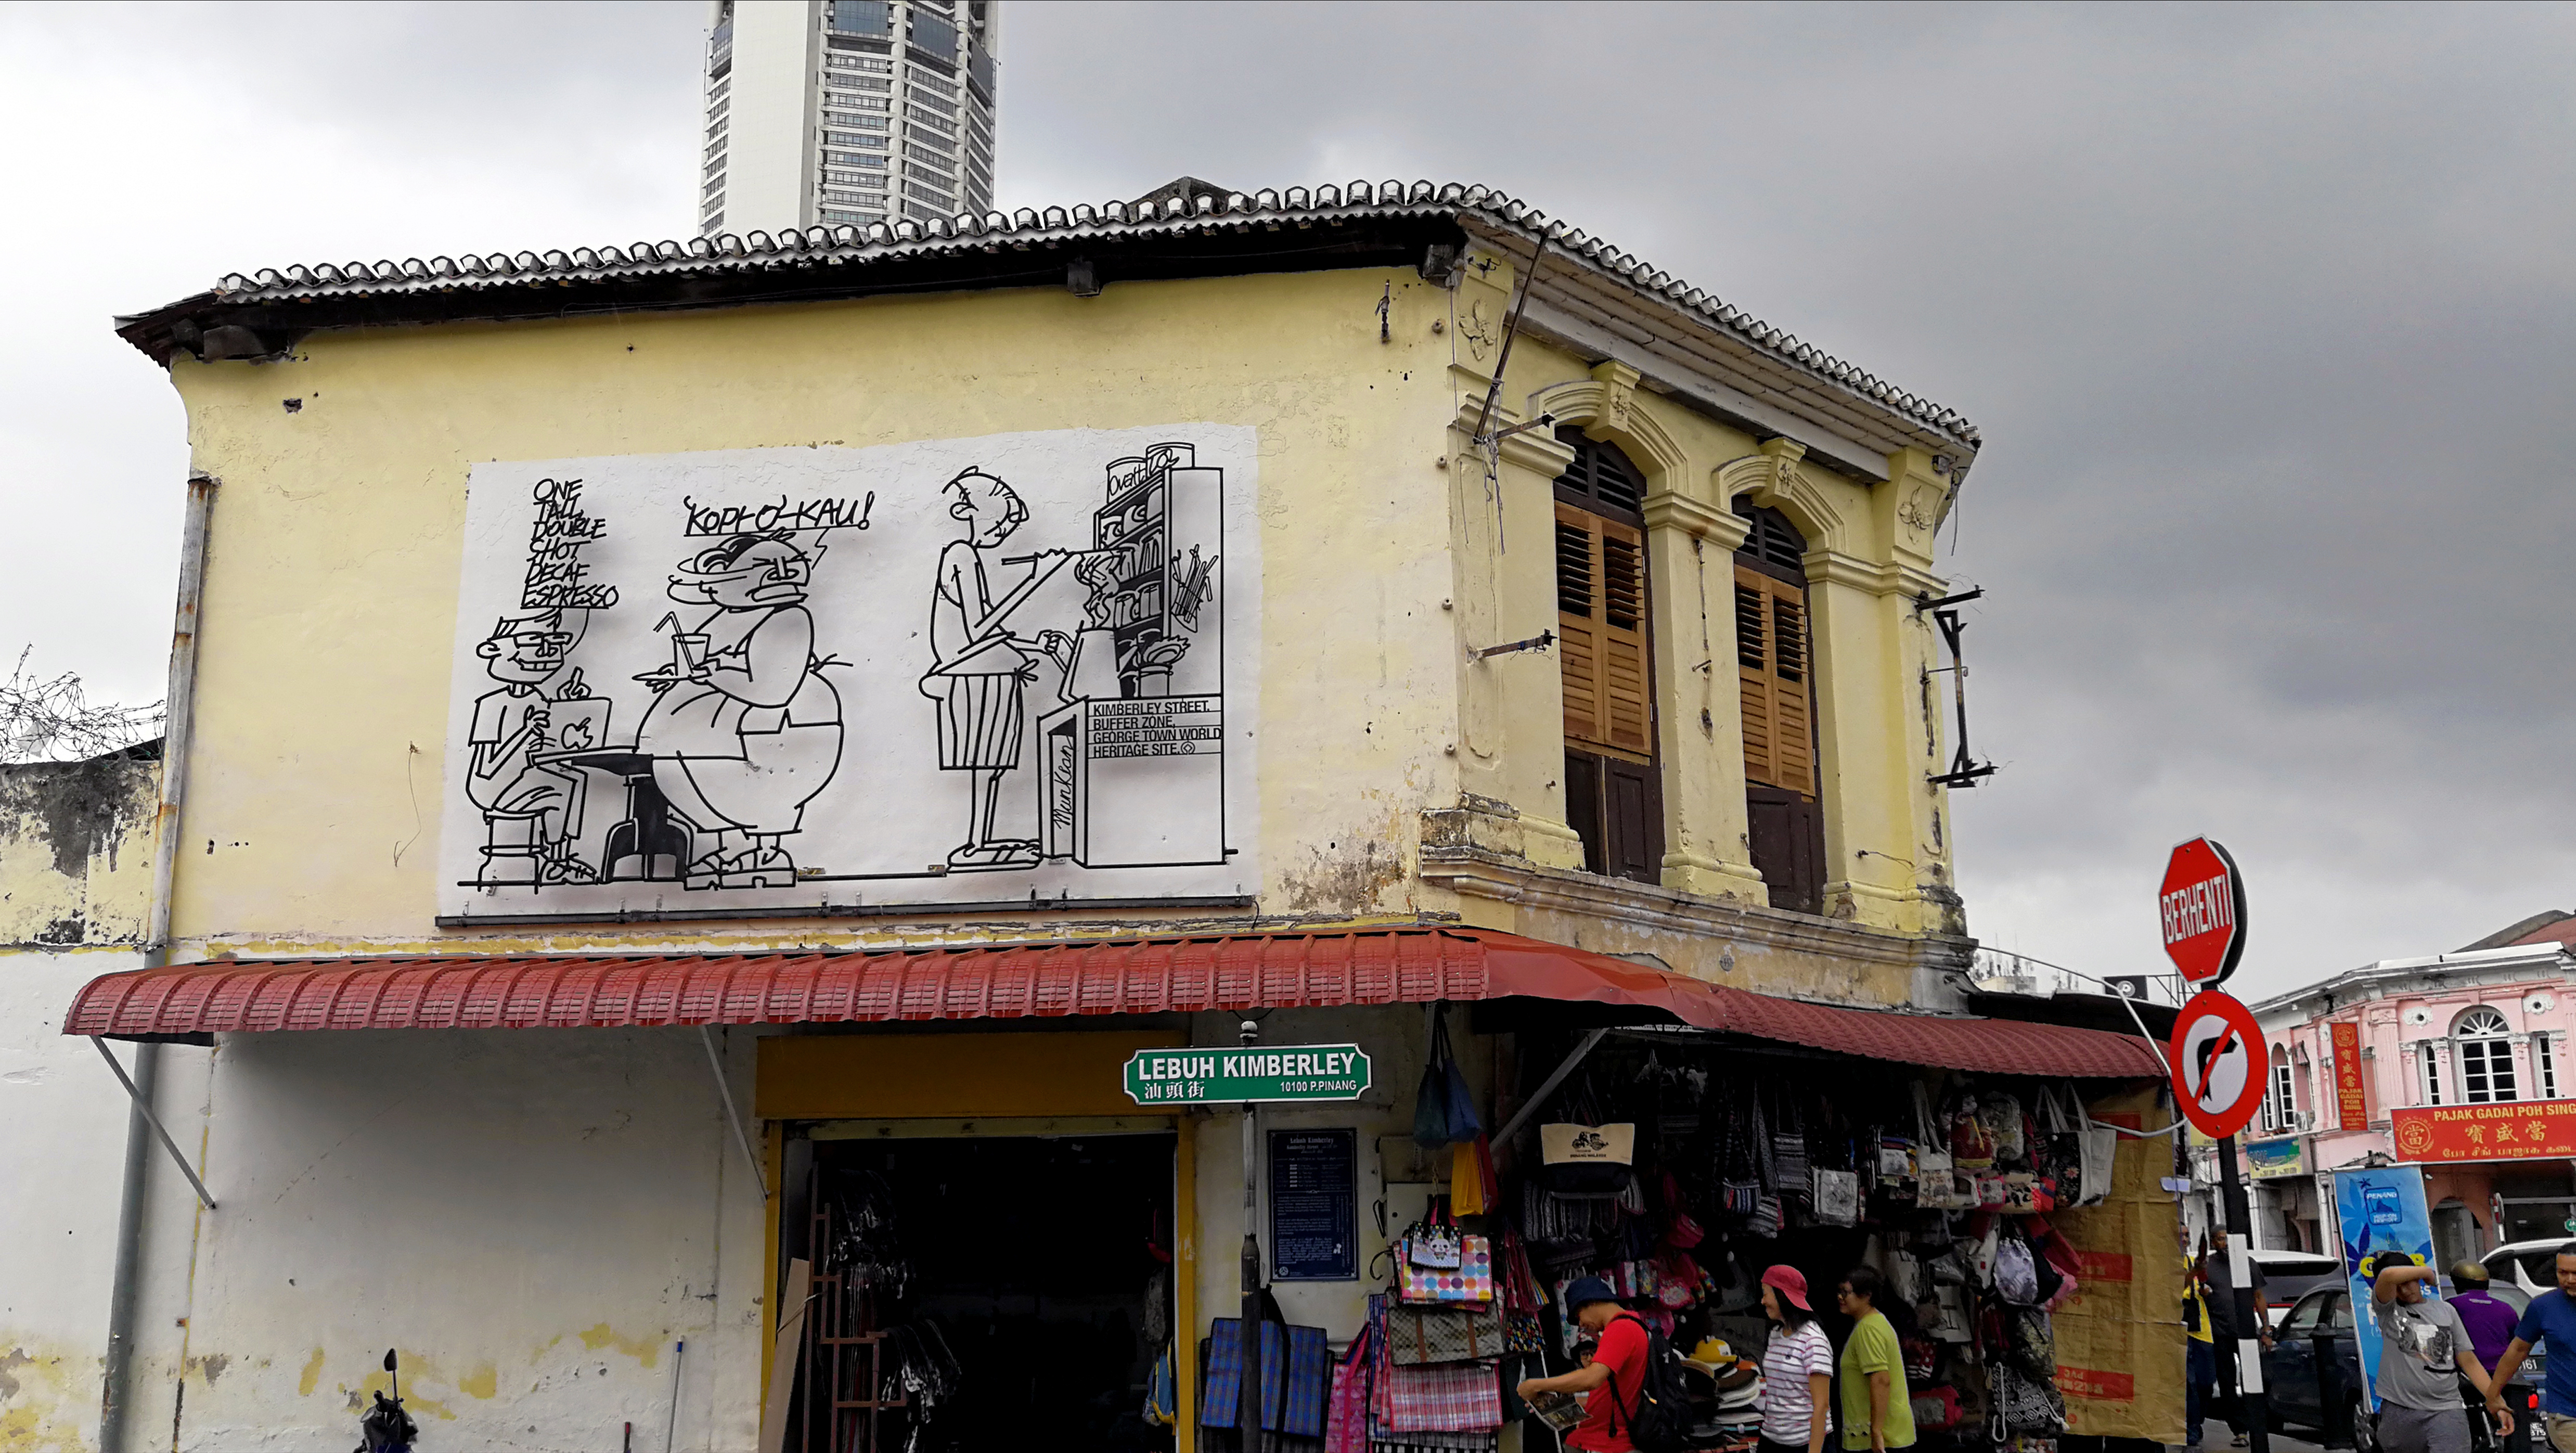 Penang’s famed street art is unmissable as you wander through George Town. The colourful murals had their beginnings in 2009, through a government-run competition that saw 52 steel rod sculptures depicting local customs and heritage installed on various streets. Photo by Alexandra Wong